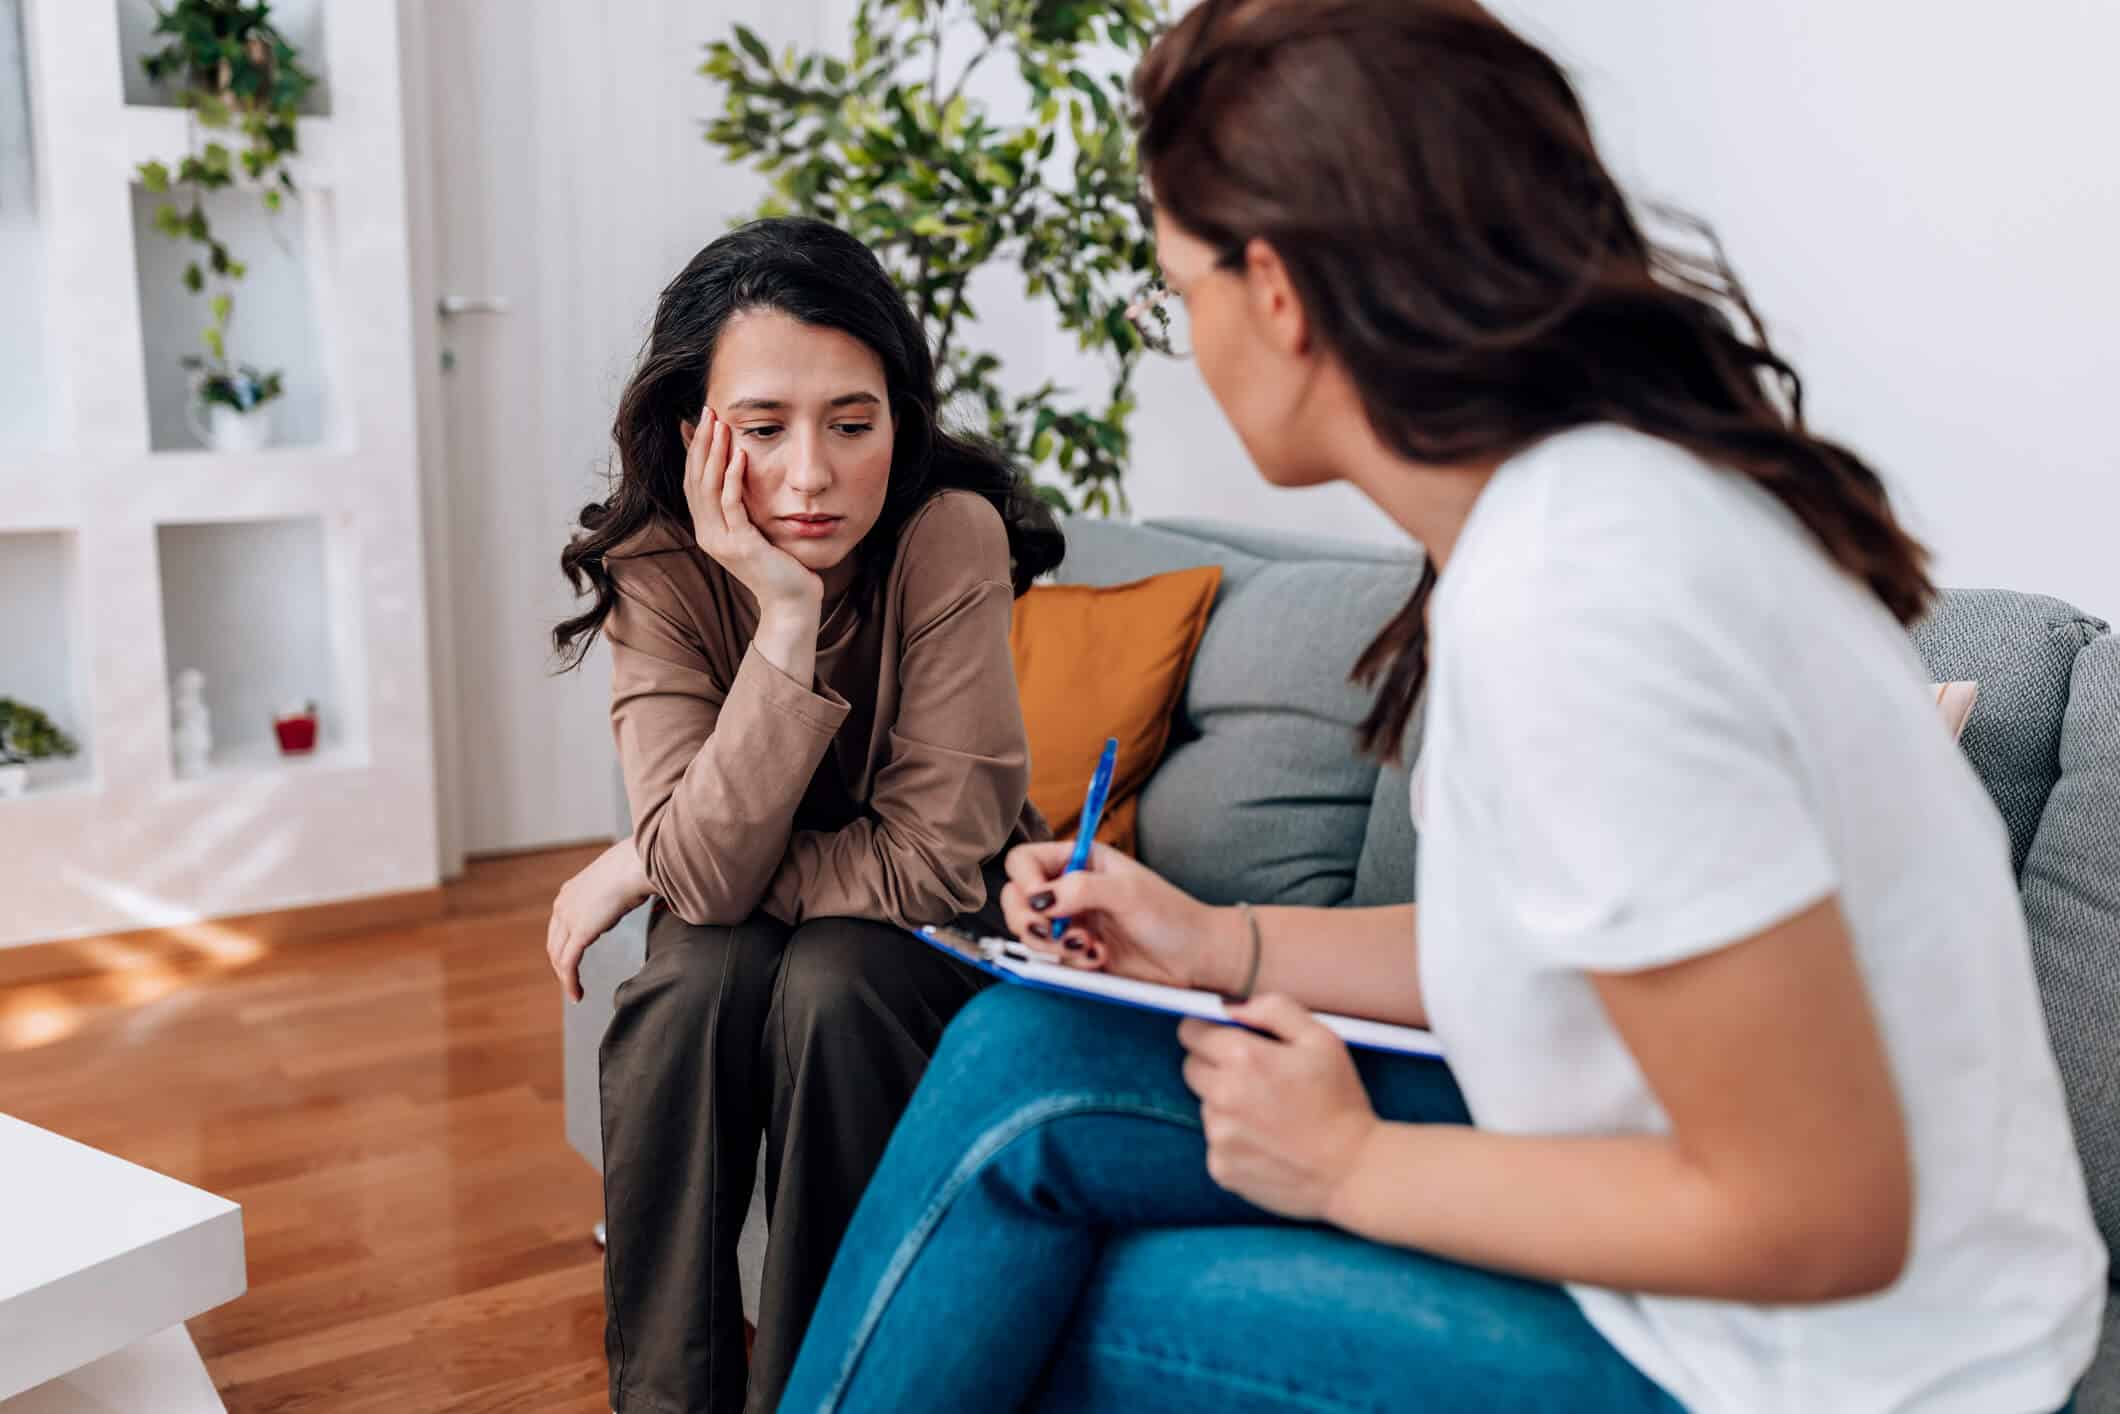 A sad looking woman sitting on a couch in front of a therapist during an in person visit